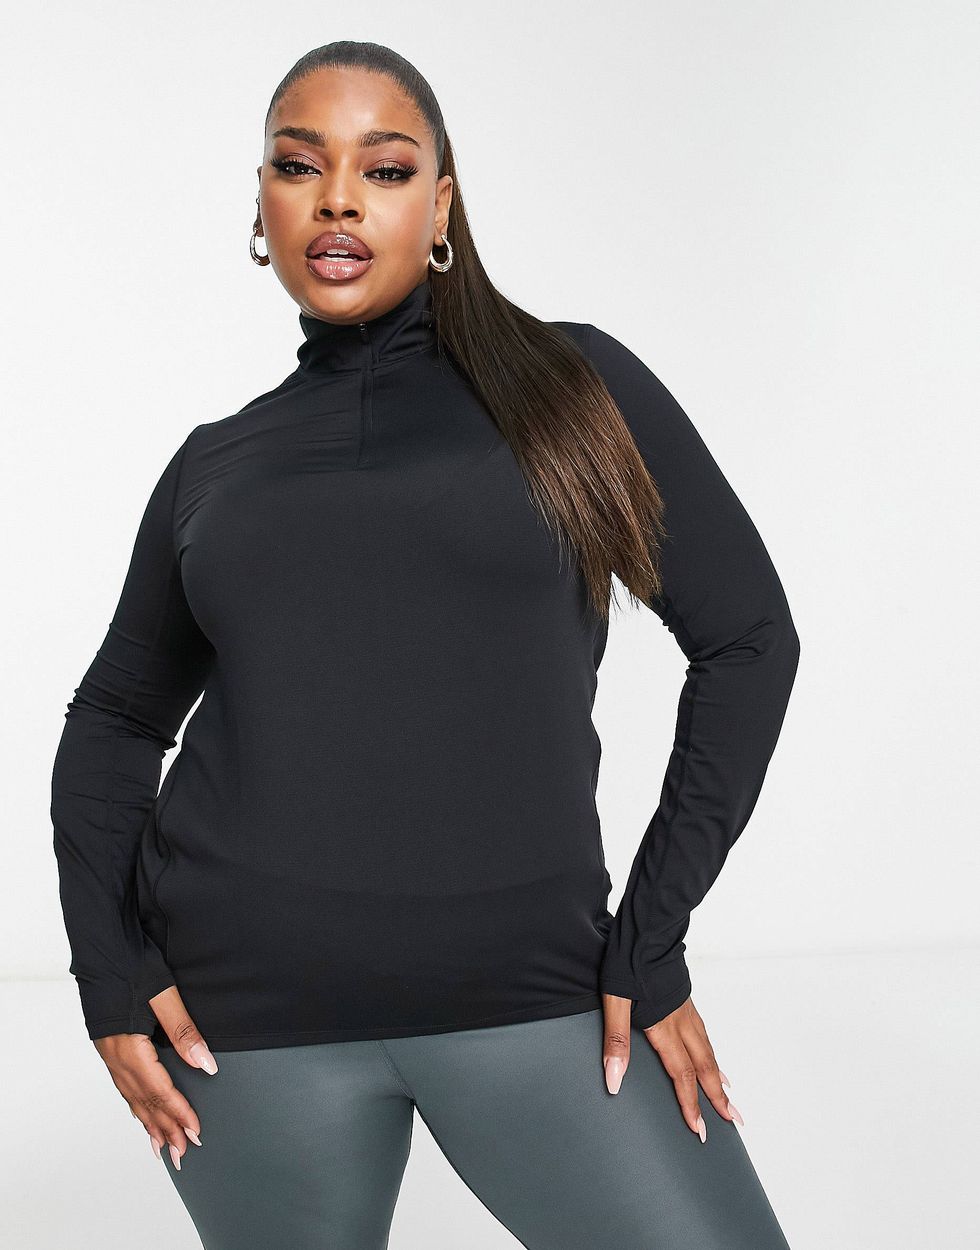 Plus Size Long Tops To Wear With Leggings - My Curves And Curls